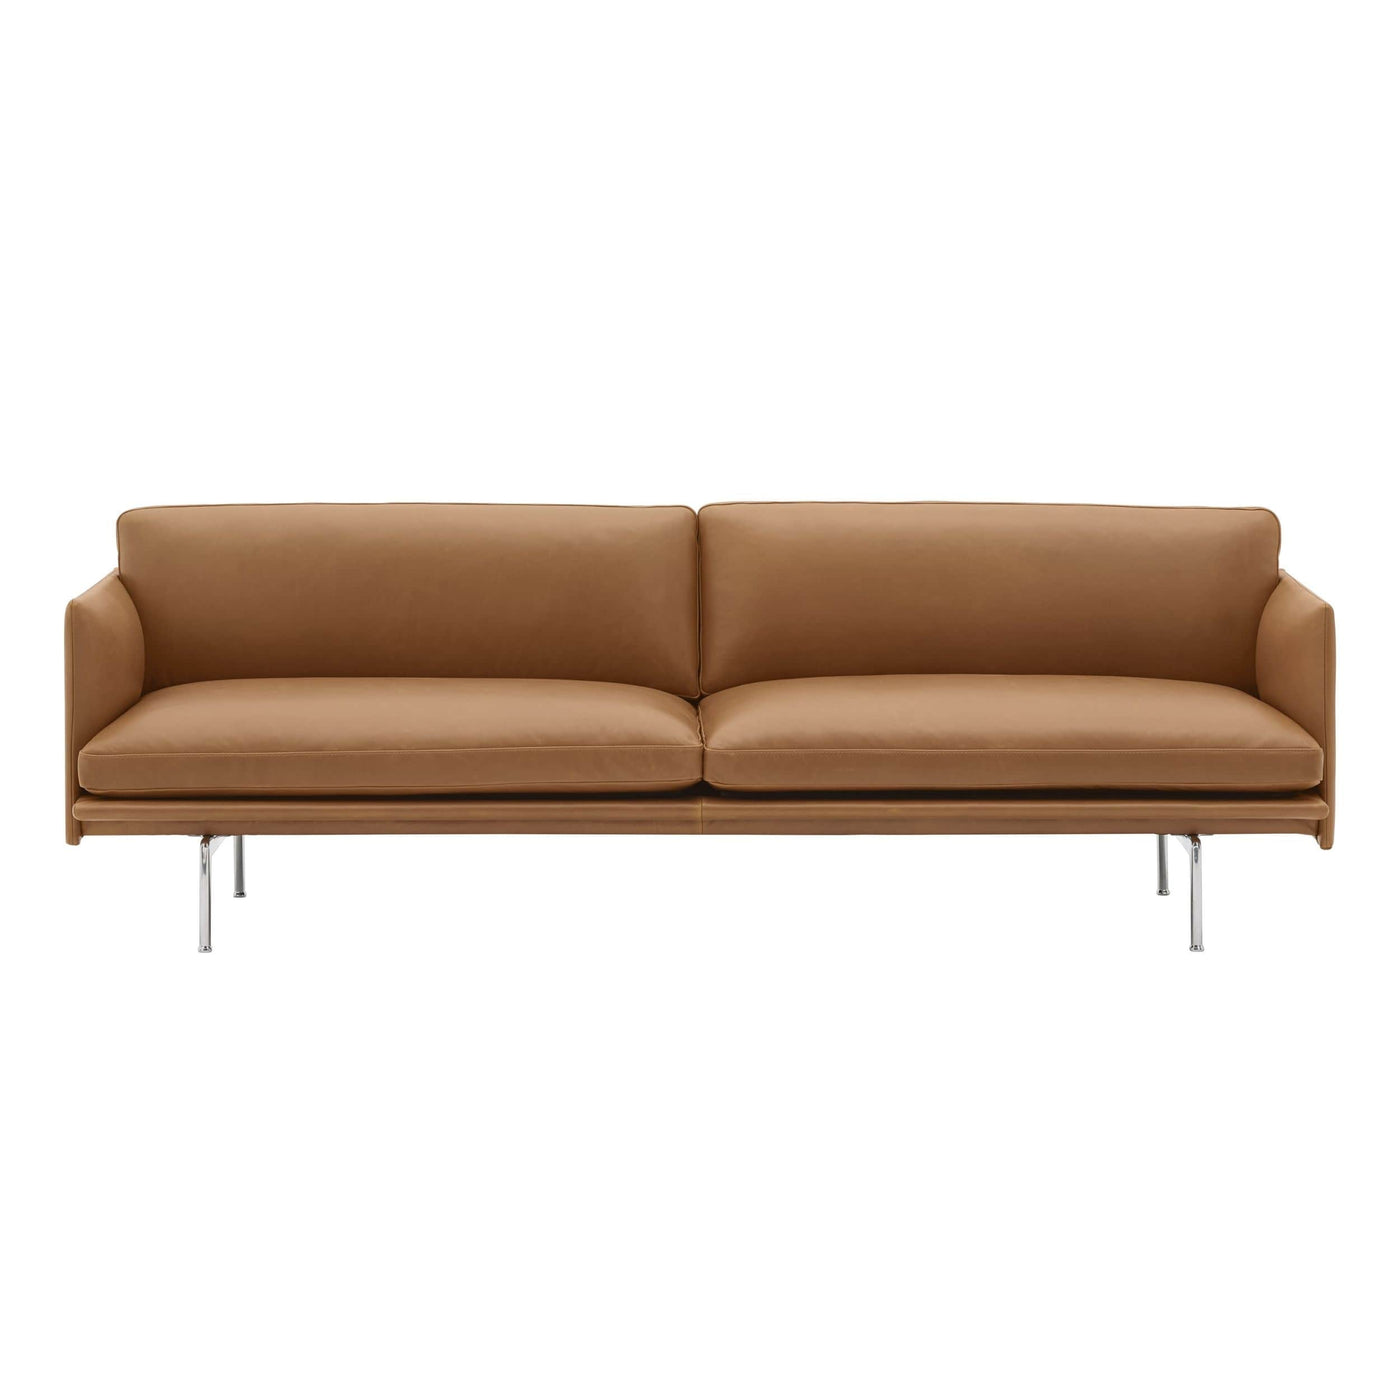 Muuto Outline Studio Sofa 220cm in cognac refine leather. Made to order from someday designs #colour_cognac-refine-leather